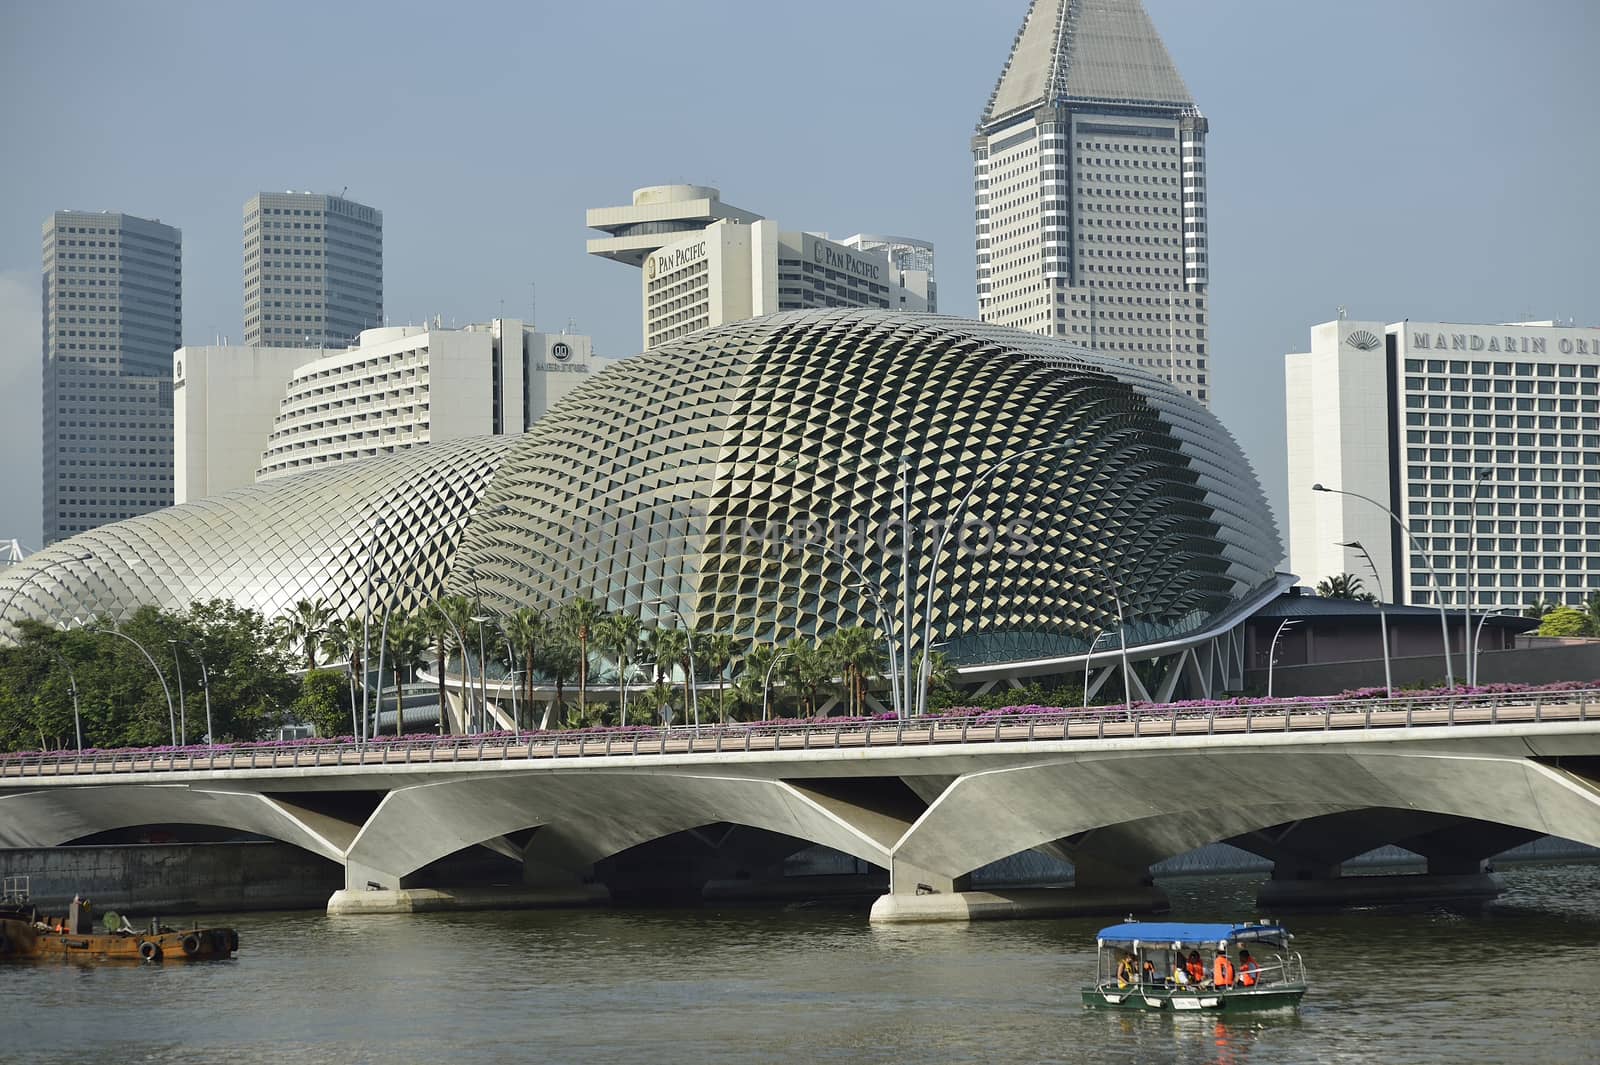 Located at Waterfront, Marina Bay, mouth of Singapore River. The by think4photop